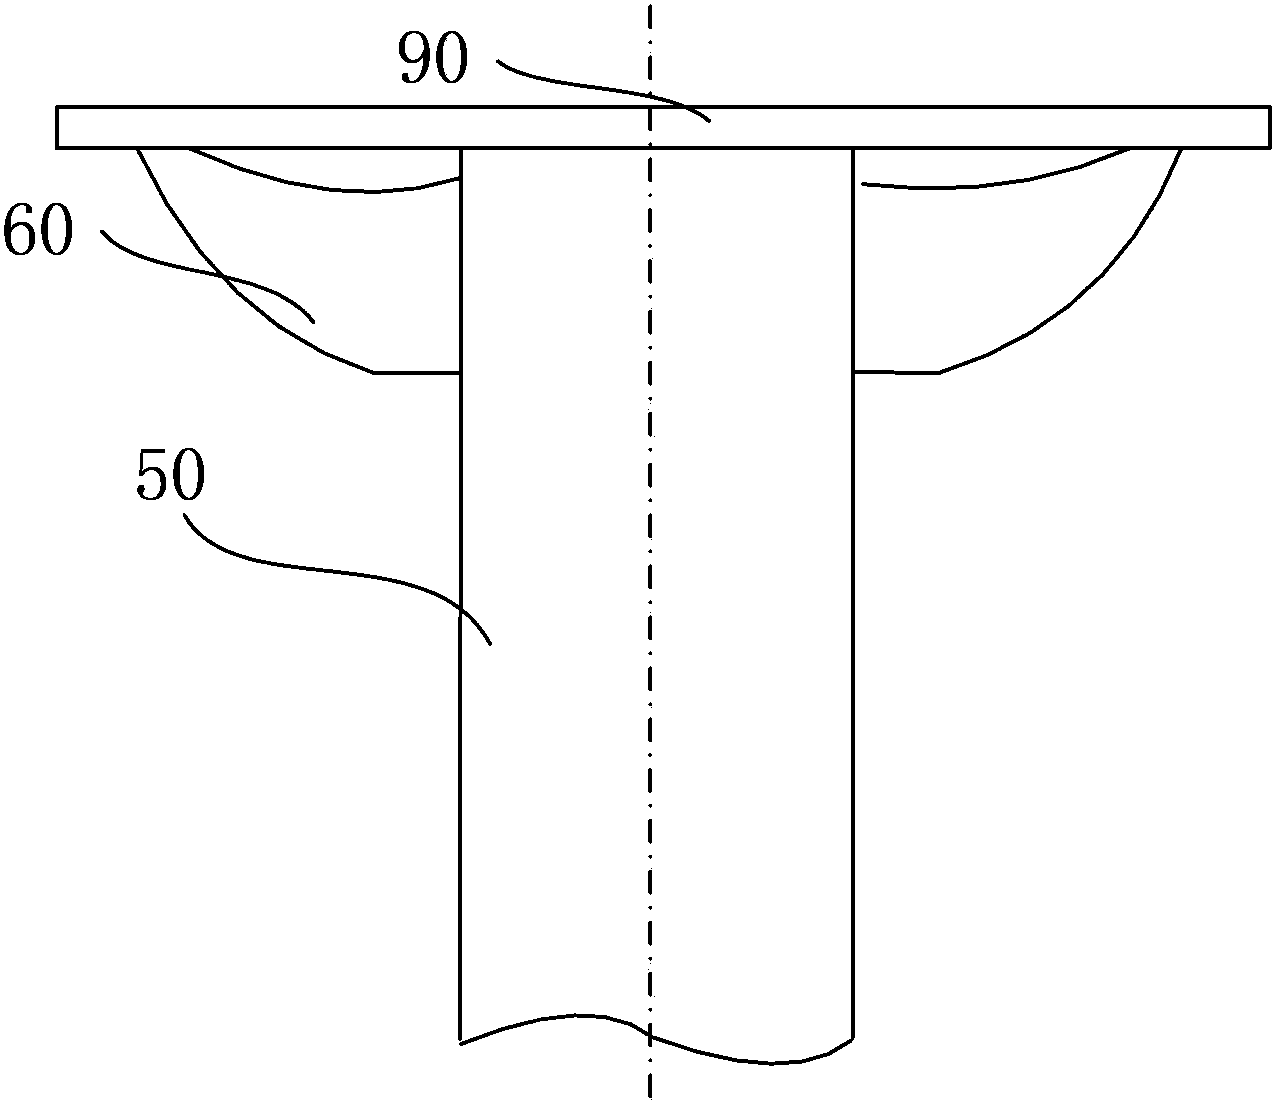 Silicon slice ejection mechanism